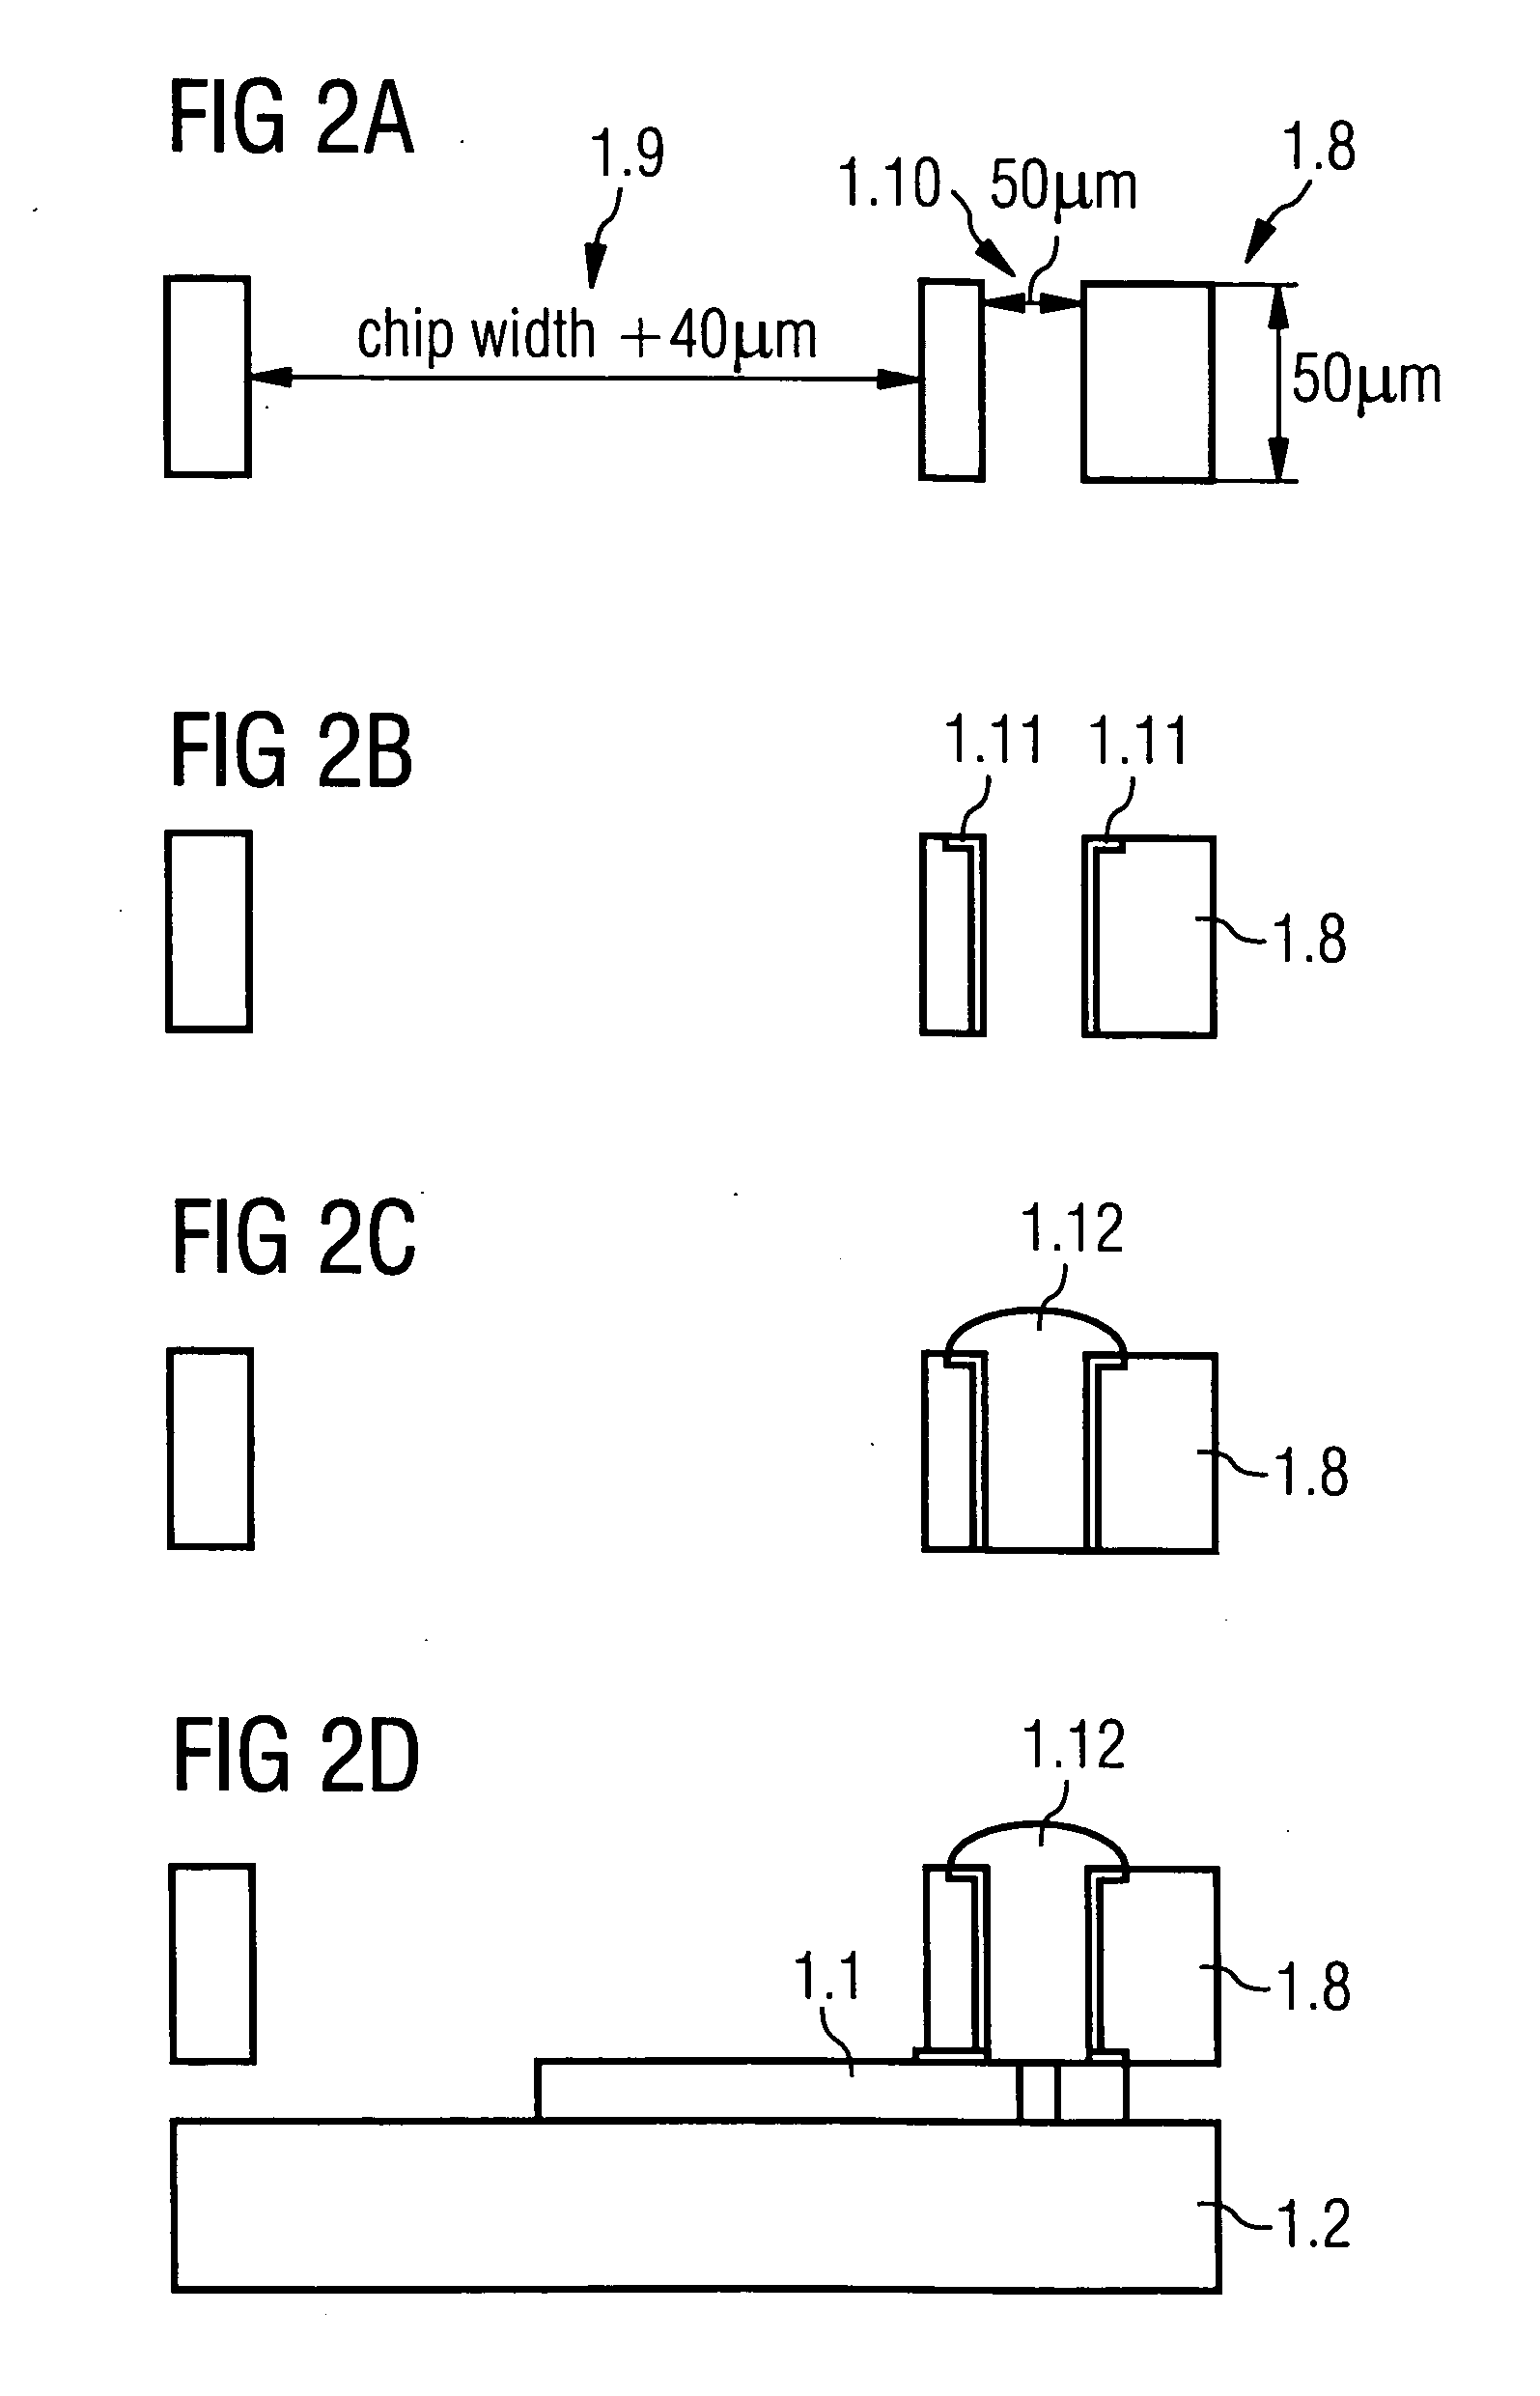 Dissociated fabrication of packages and chips of integrated circuits